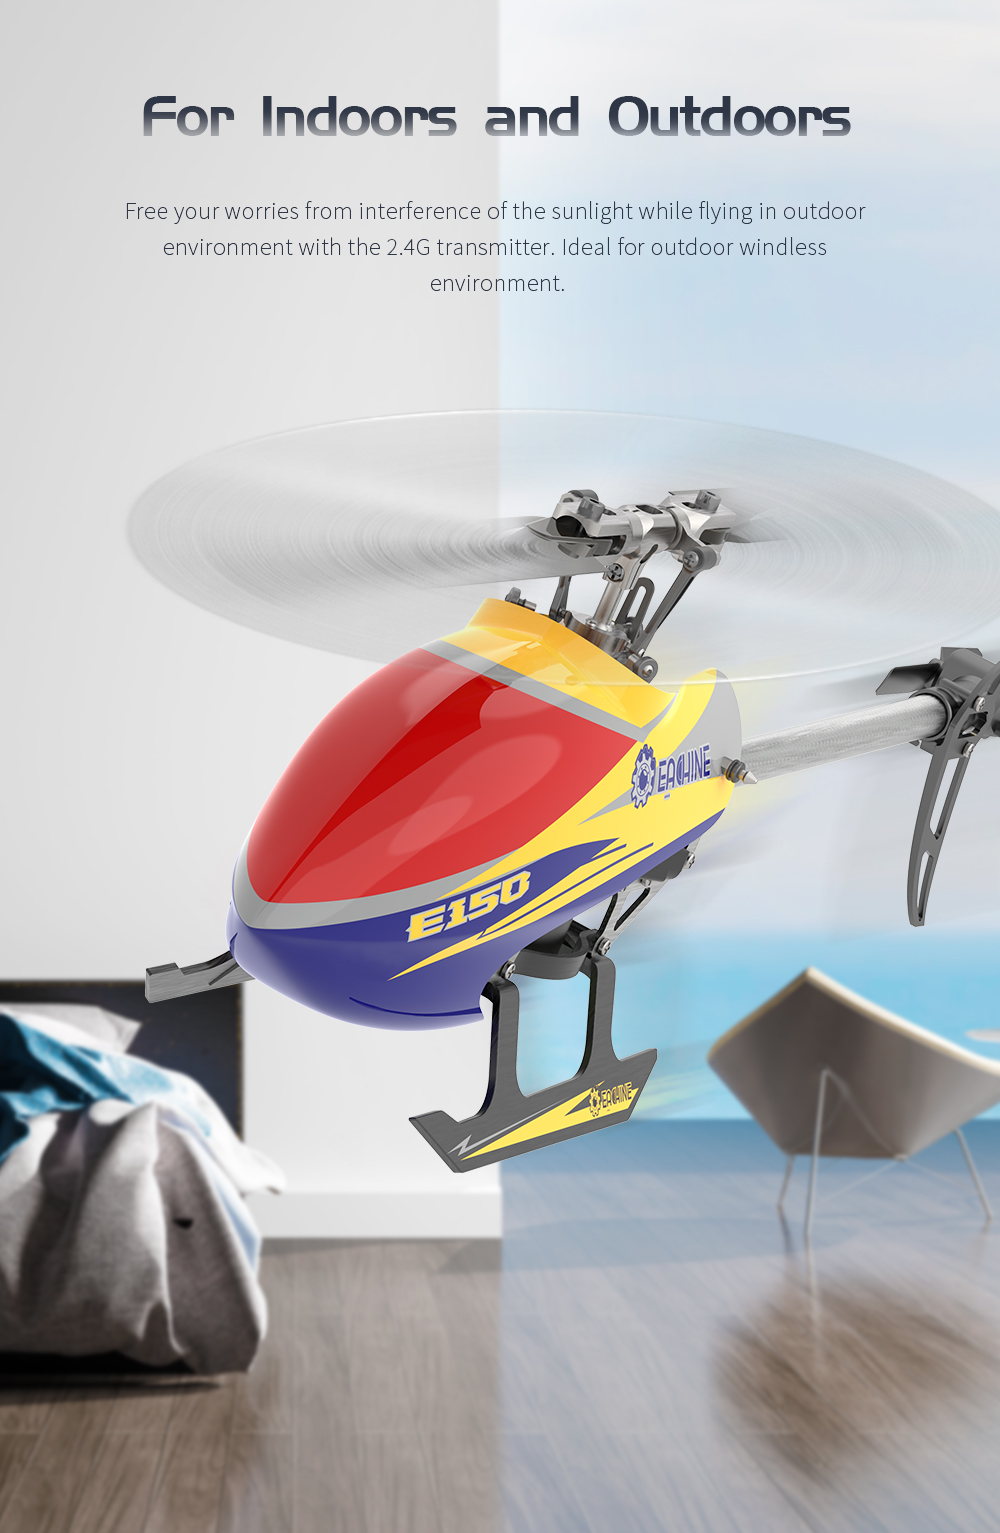 Eachine-E150-24G-6CH-6-Axis-Gyro-3D6G-Dual-Brushless-Direct-Drive-Motor-Flybarless-RC-Helicopter-RTF-1900368-10